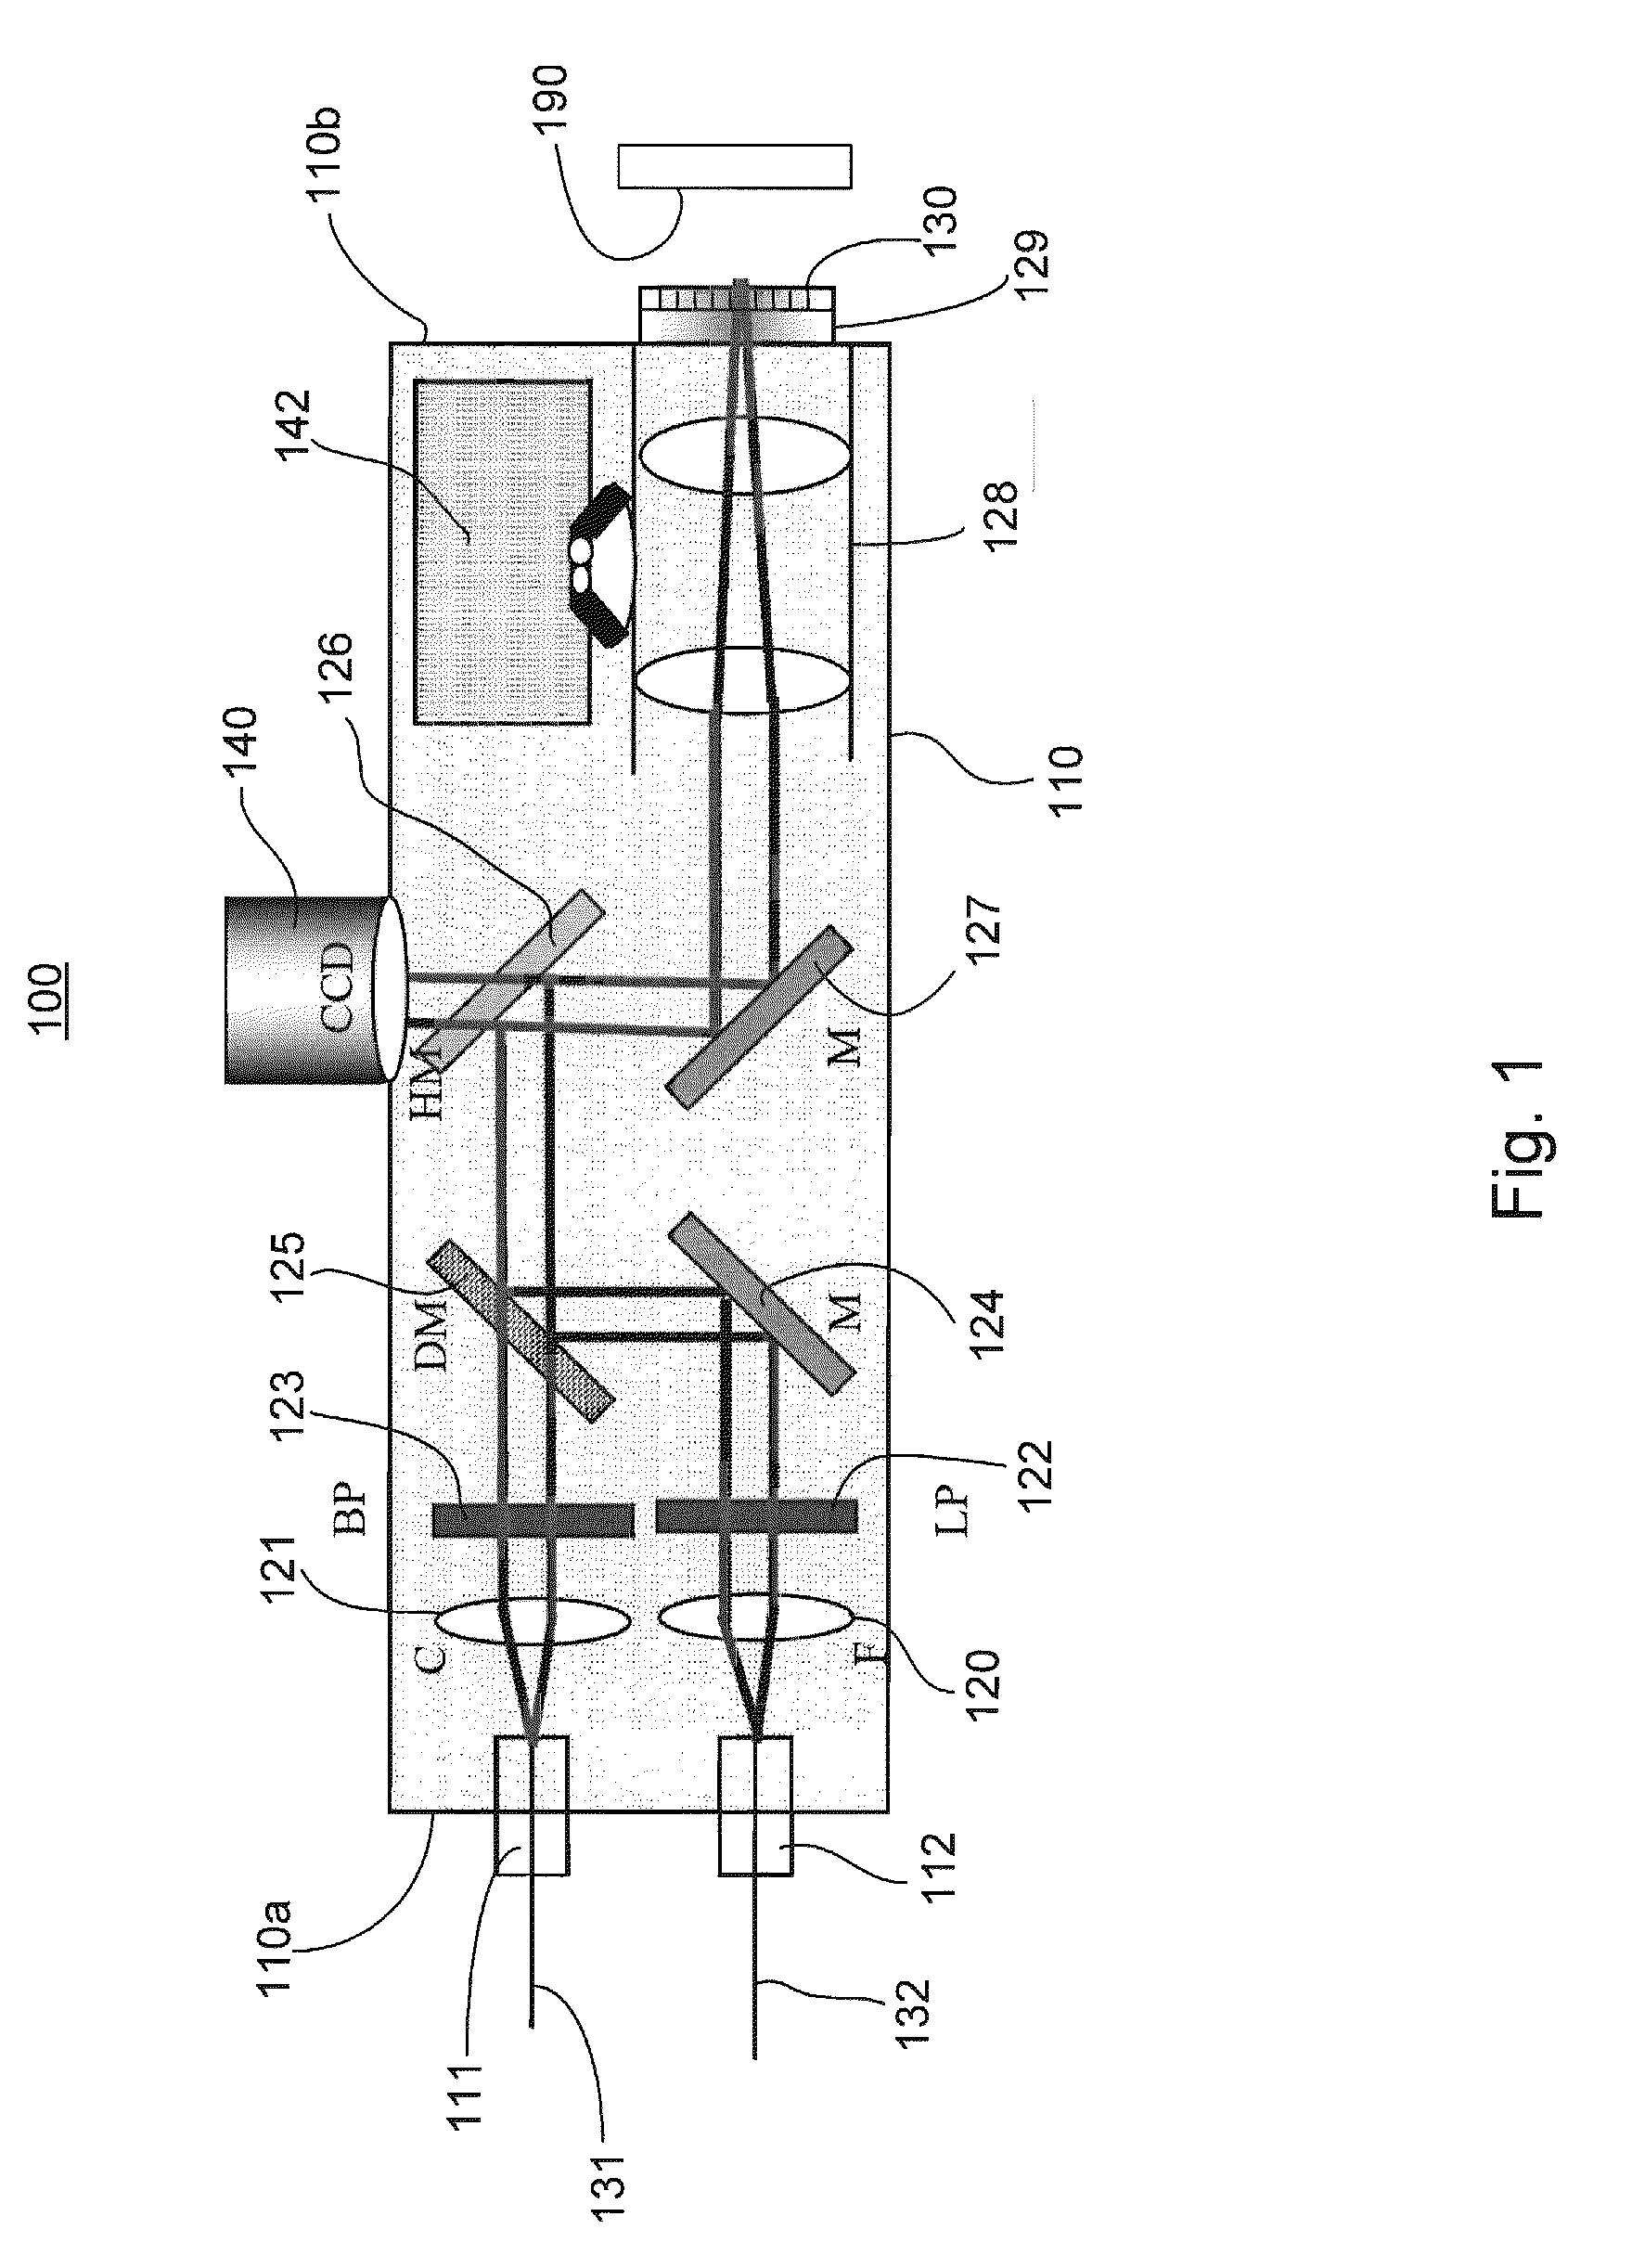 Device and method for non-invasively evaluating a target of interest of a living subject